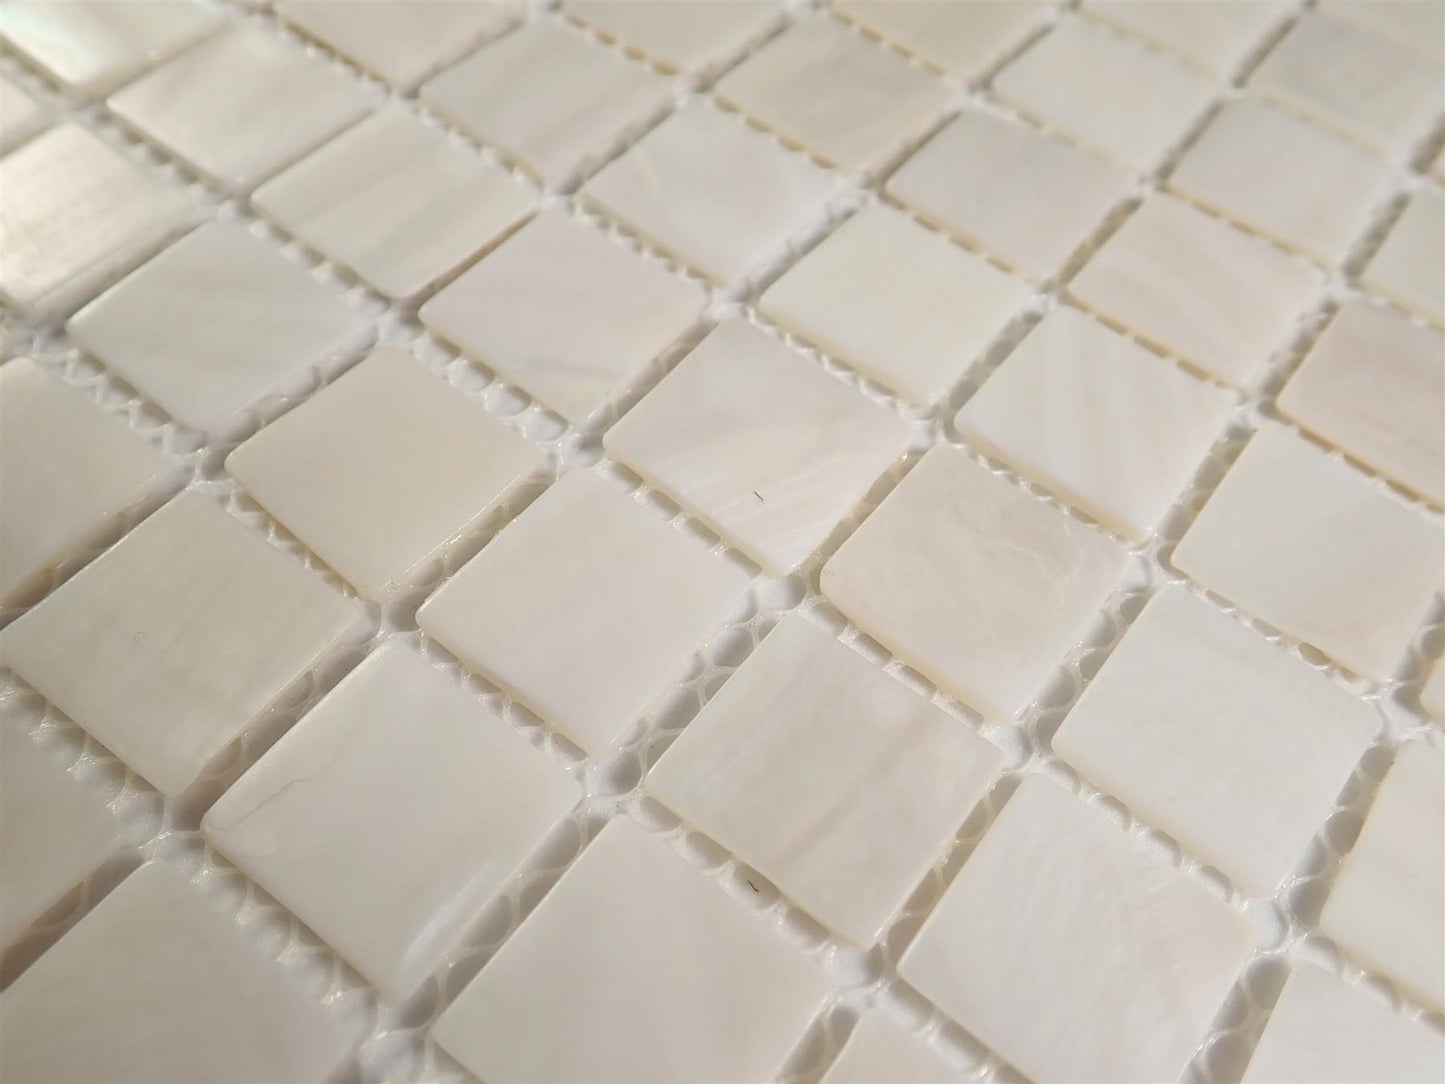 Incudo White Square Mosaic Mother of Pearl Tiles - 305x305x2mm (12x12.01x0.08"), Pack of 11, 1.02 Sq. M